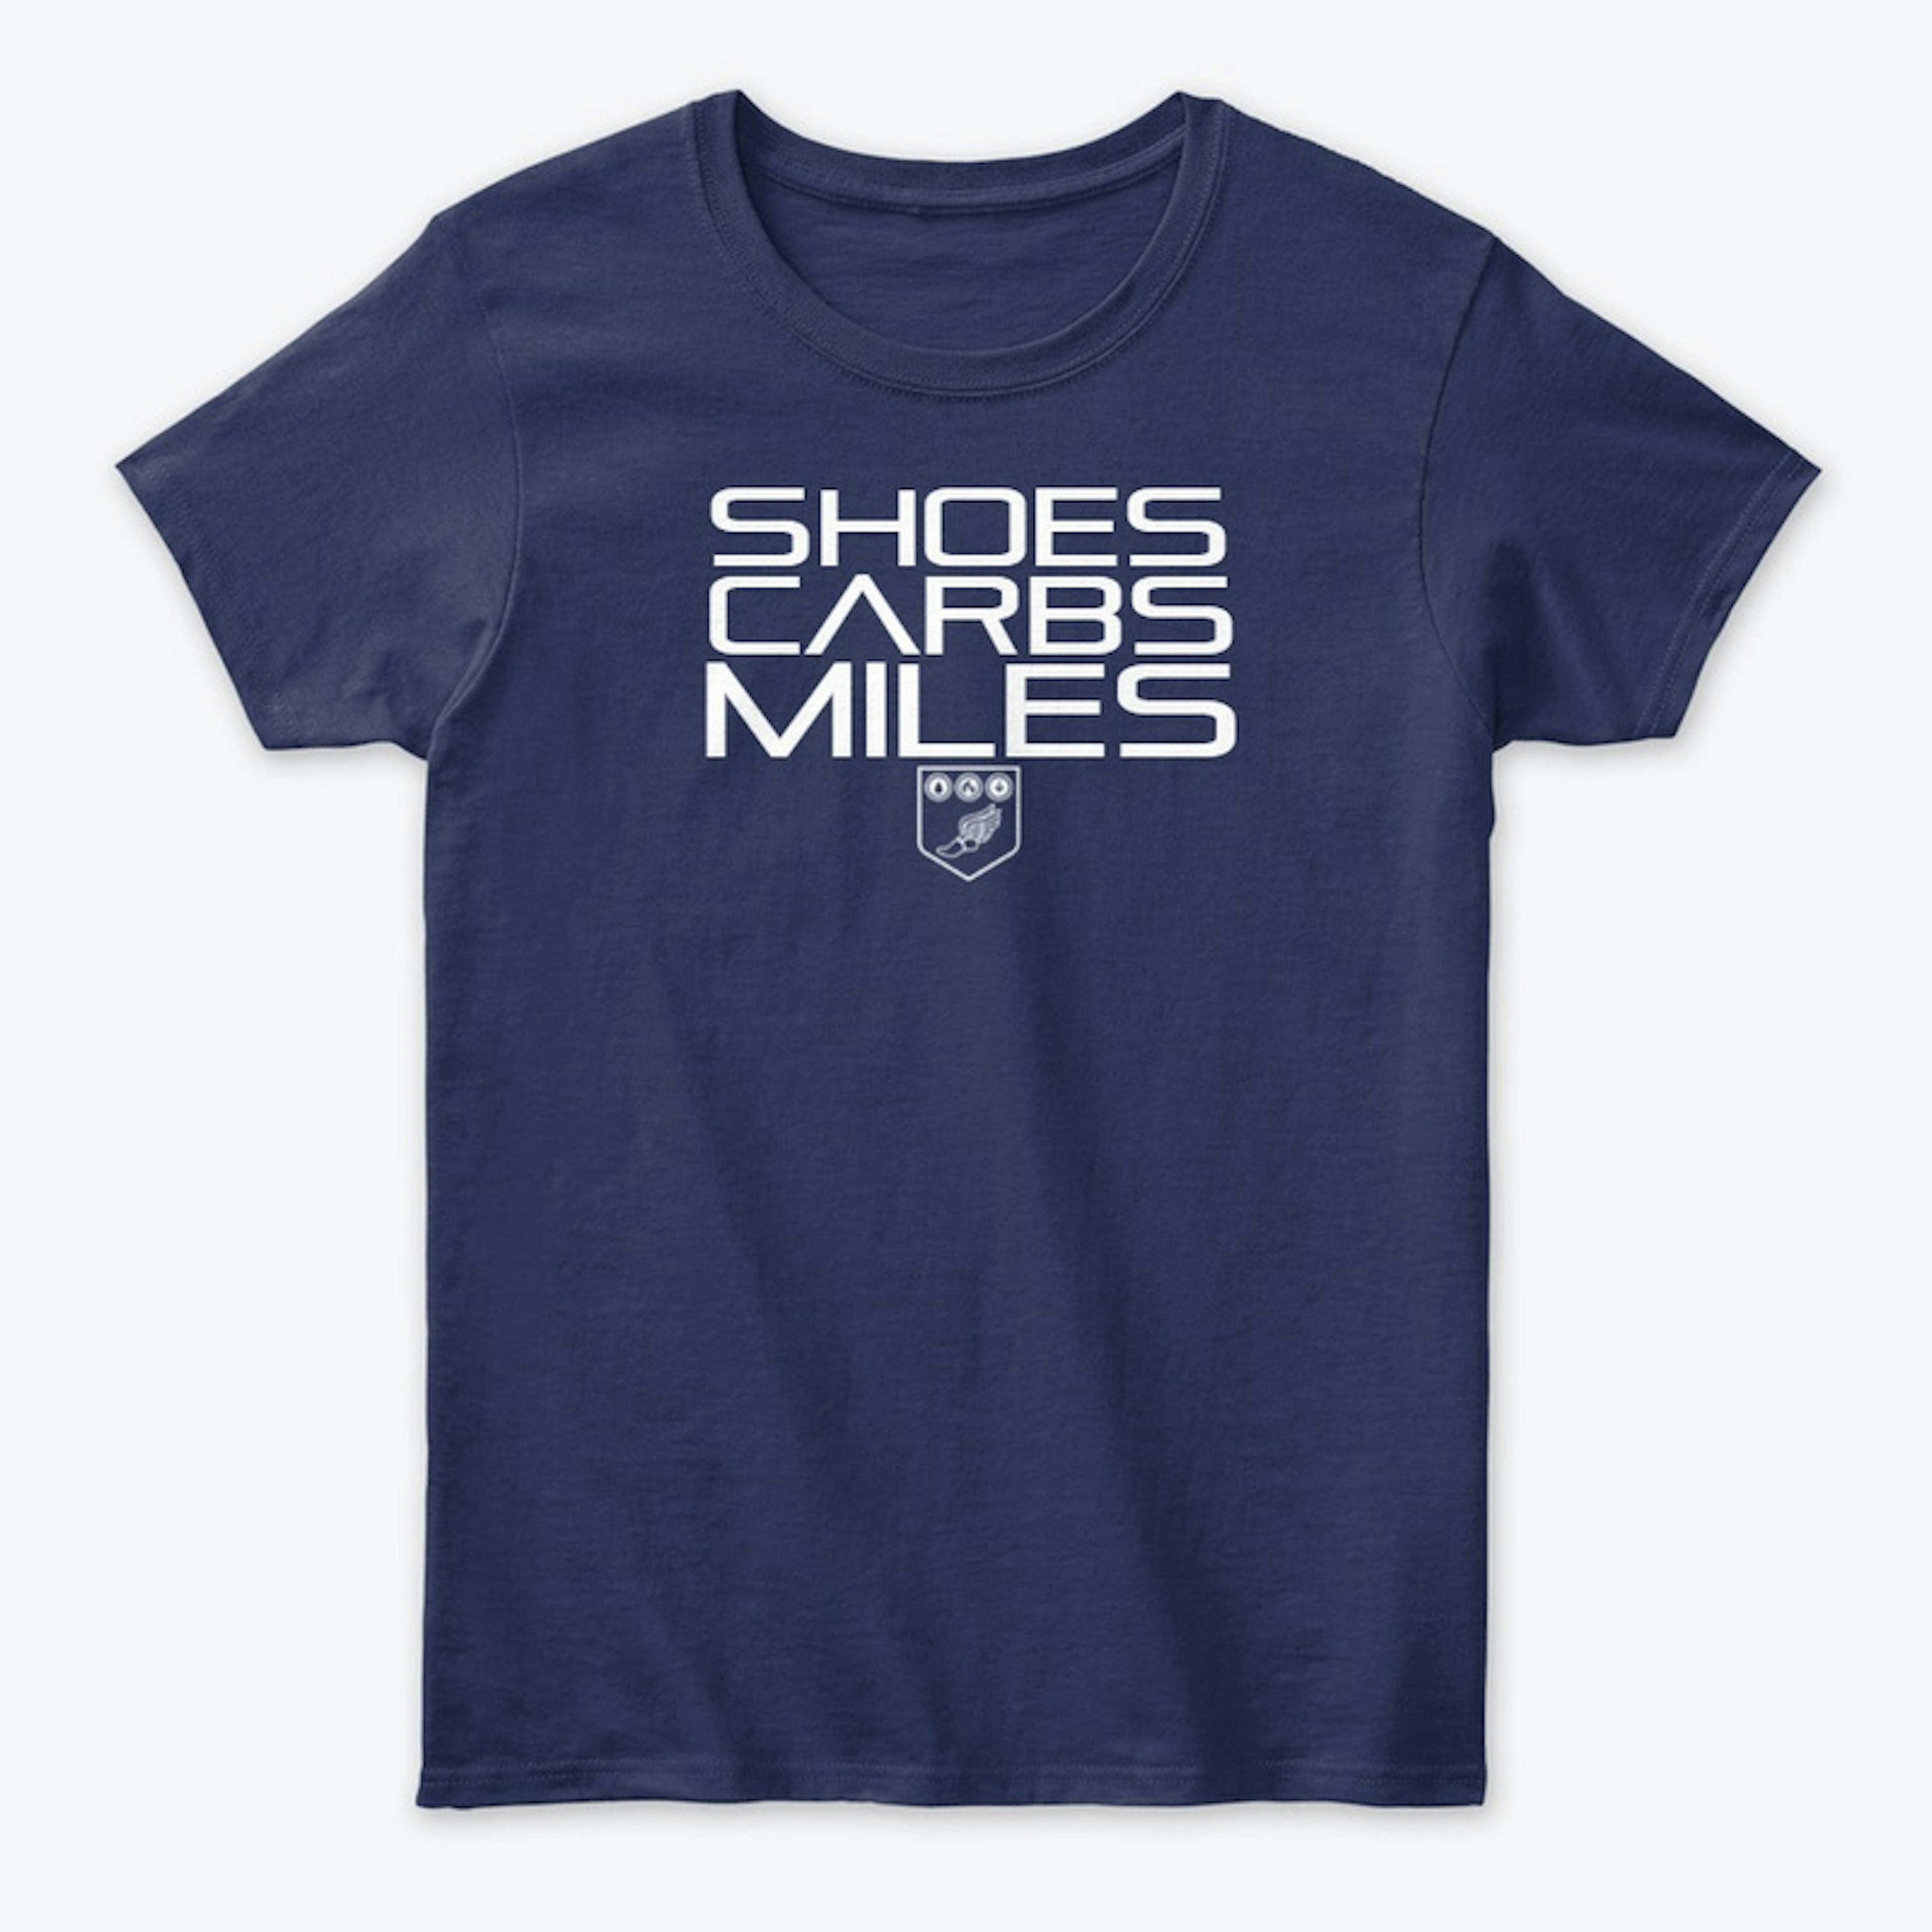 Shoes Carbs Miles